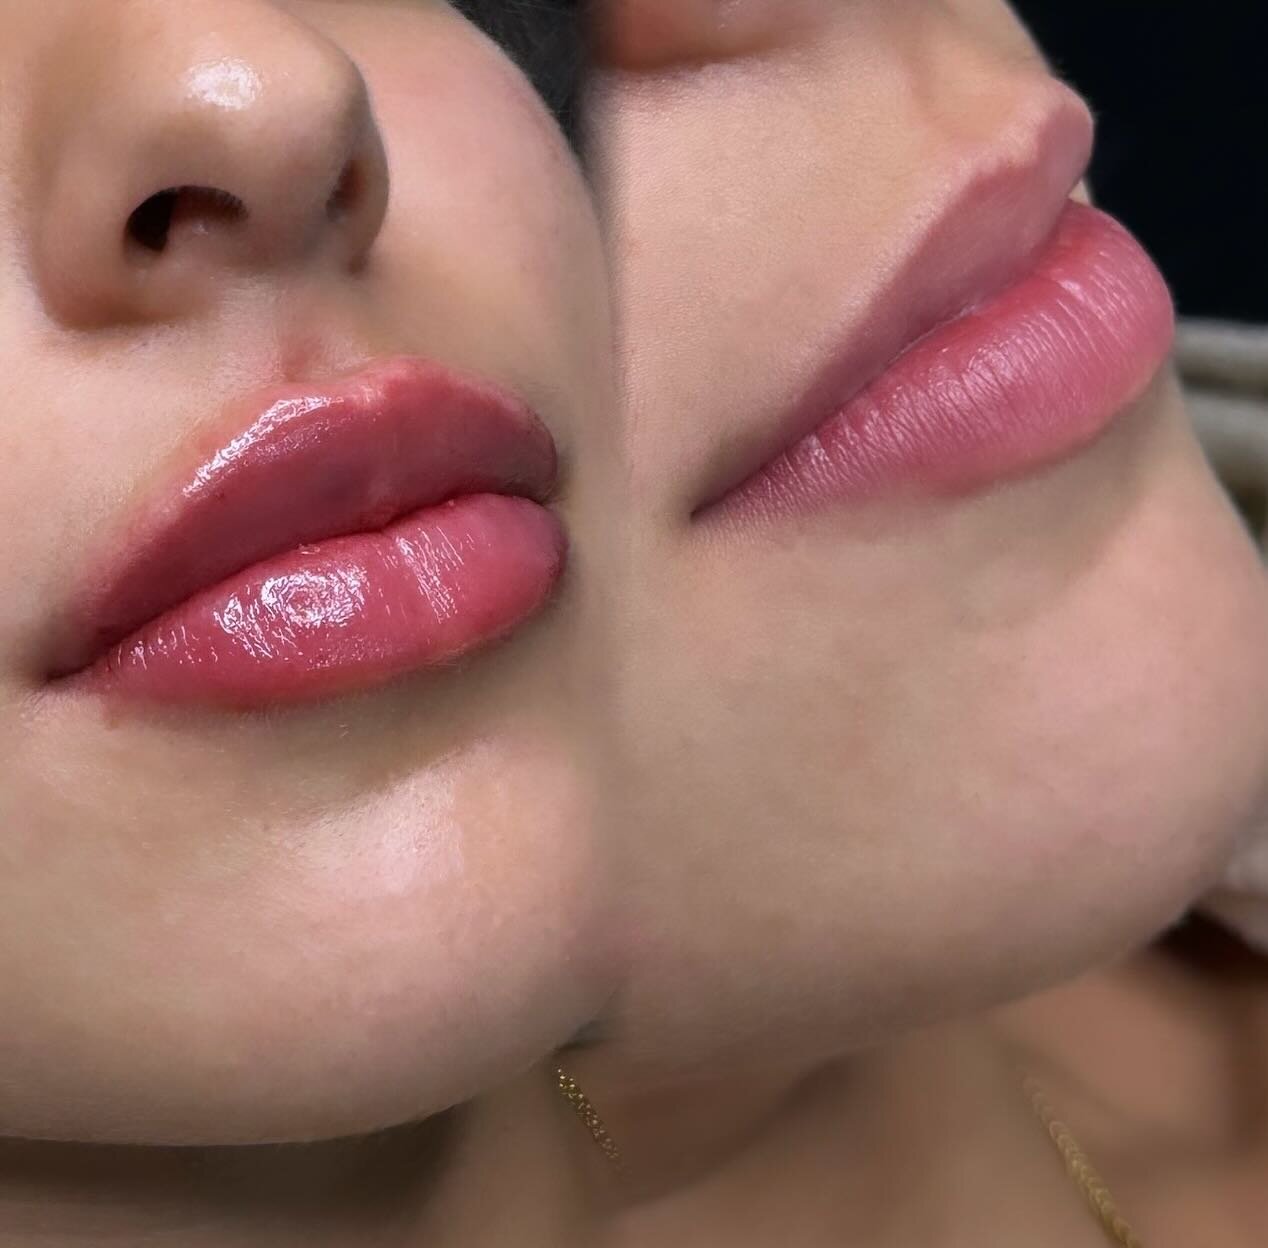 Show Stopper 🤤😍

Look at these sexy lips 🫦&hellip;. Now is the time to treat yourself with Valentines around the corner 💝 

Achieved using 1 syringe of Versa 💉
A nerve block was performed as well as Topical numbing for absolutely zero discomfort